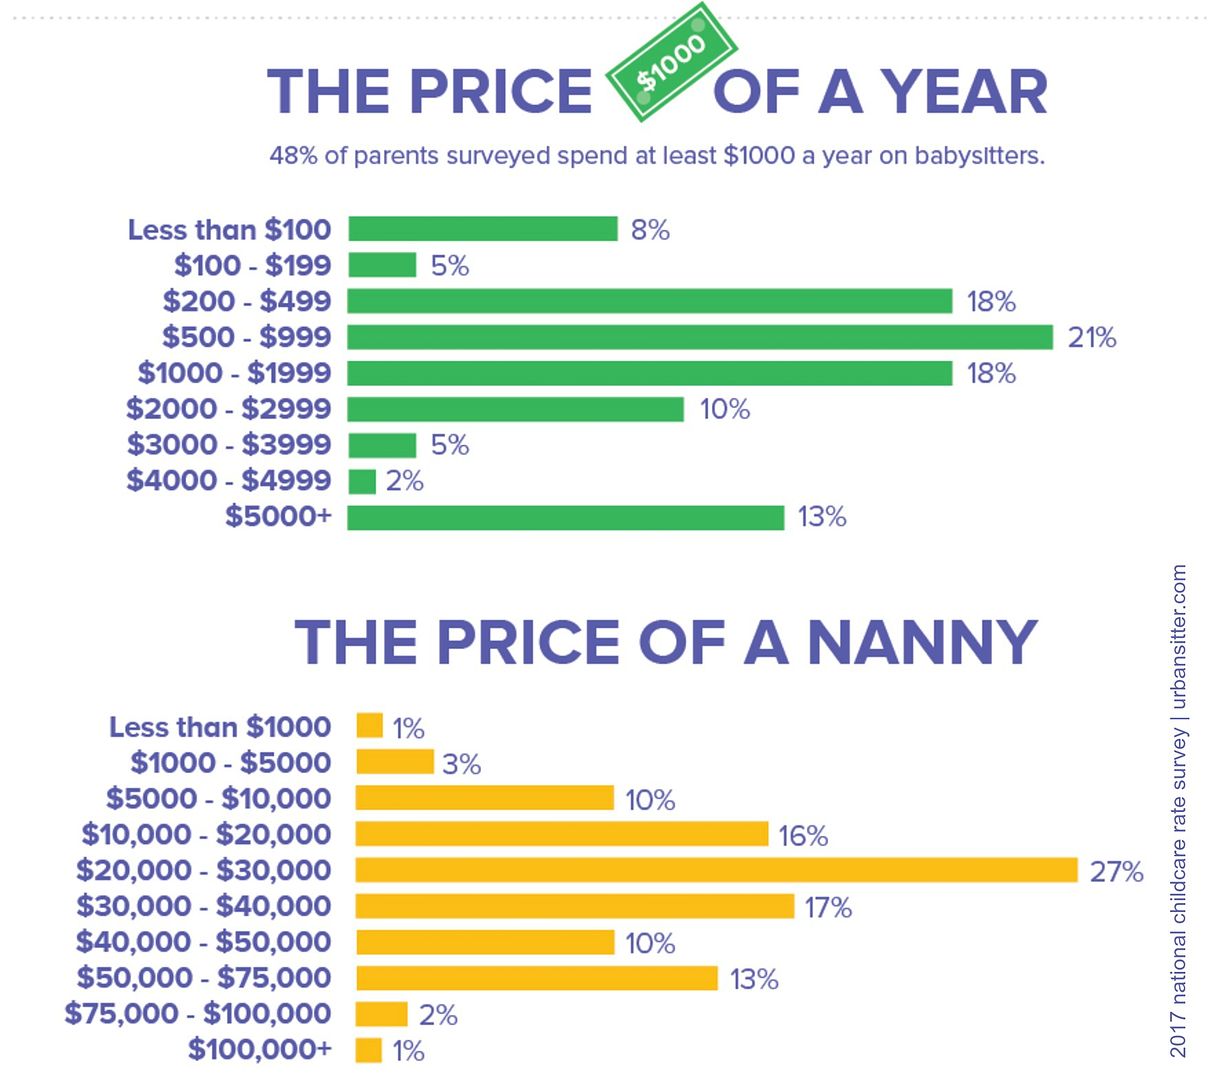 Annual price for nannies and sitters each year | UrbanSitter national survey